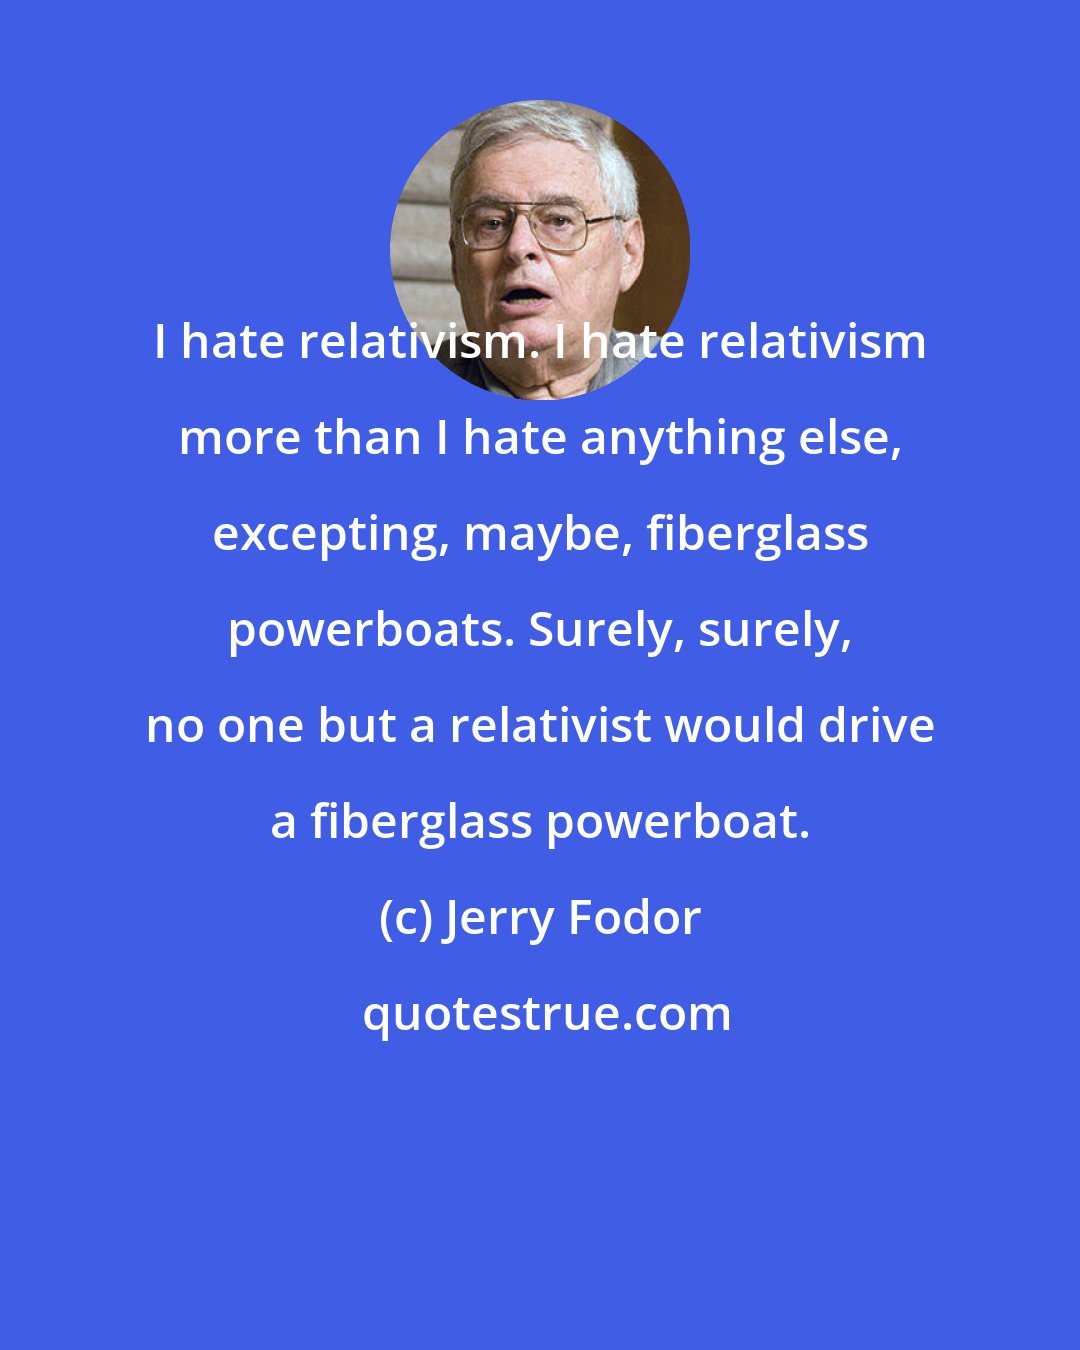 Jerry Fodor: I hate relativism. I hate relativism more than I hate anything else, excepting, maybe, fiberglass powerboats. Surely, surely, no one but a relativist would drive a fiberglass powerboat.